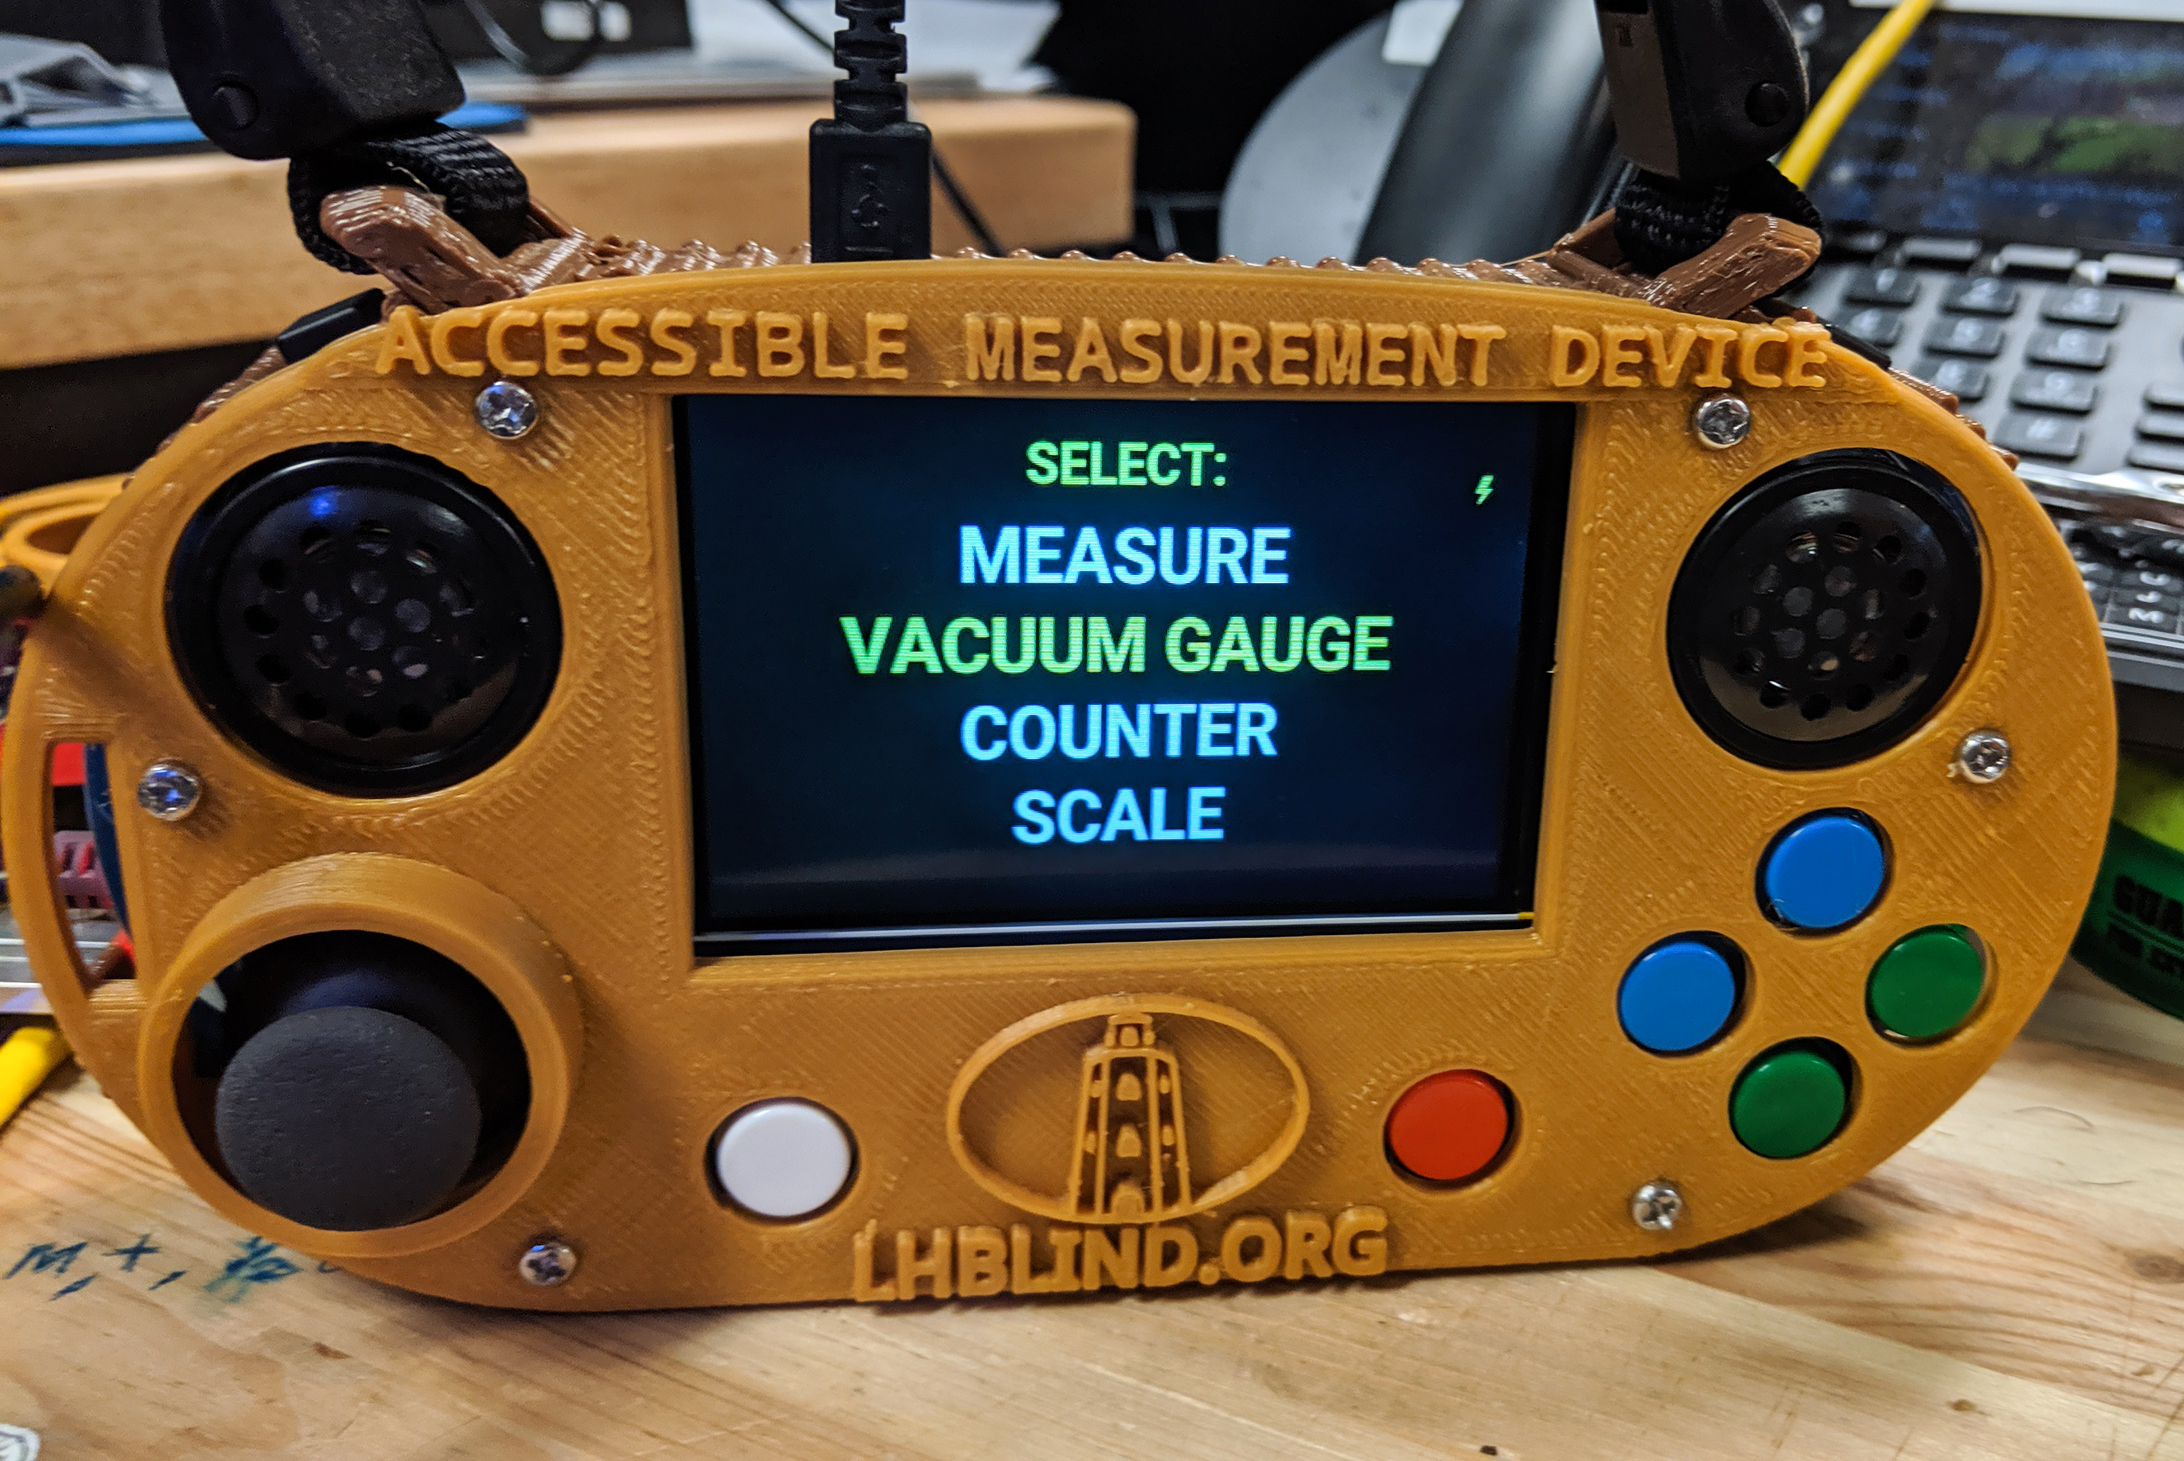 An accessible measuring device, a yellow handheld device with a large print screen